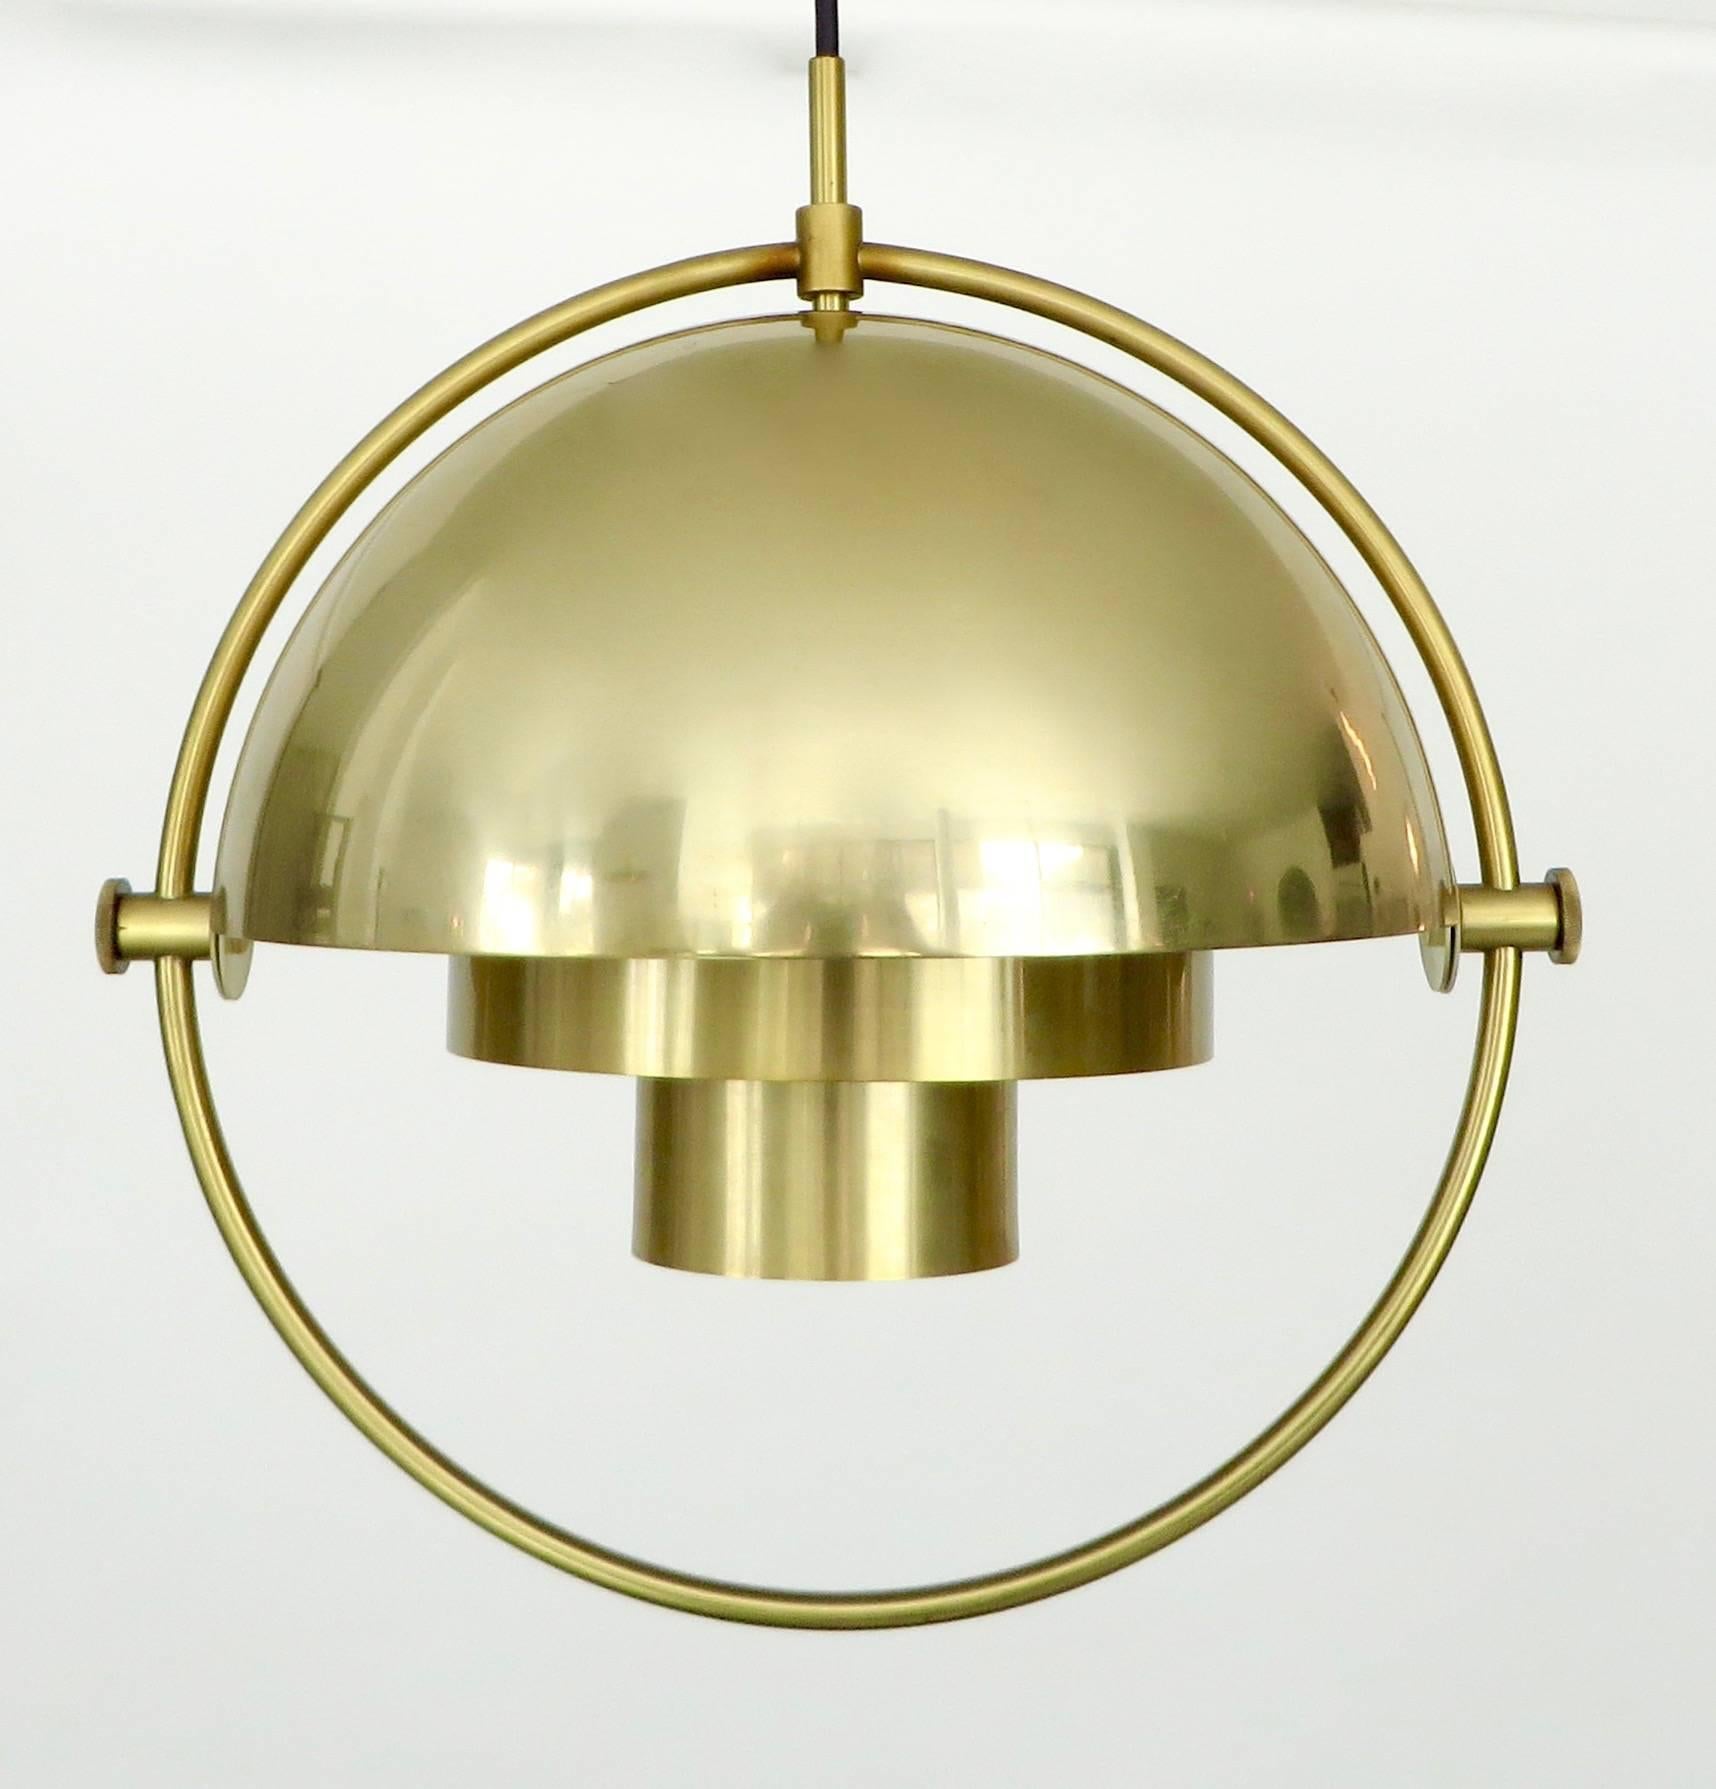 Brass vintage multi-lite pendant by Louis Weisdorf for Lyfa Denmark.
Rewired for USA. Single light source. Bulb up to 120 W.
The core of the multi-lite is a two-cylinder form that would work as a shade on its own but is additionally encompassed by